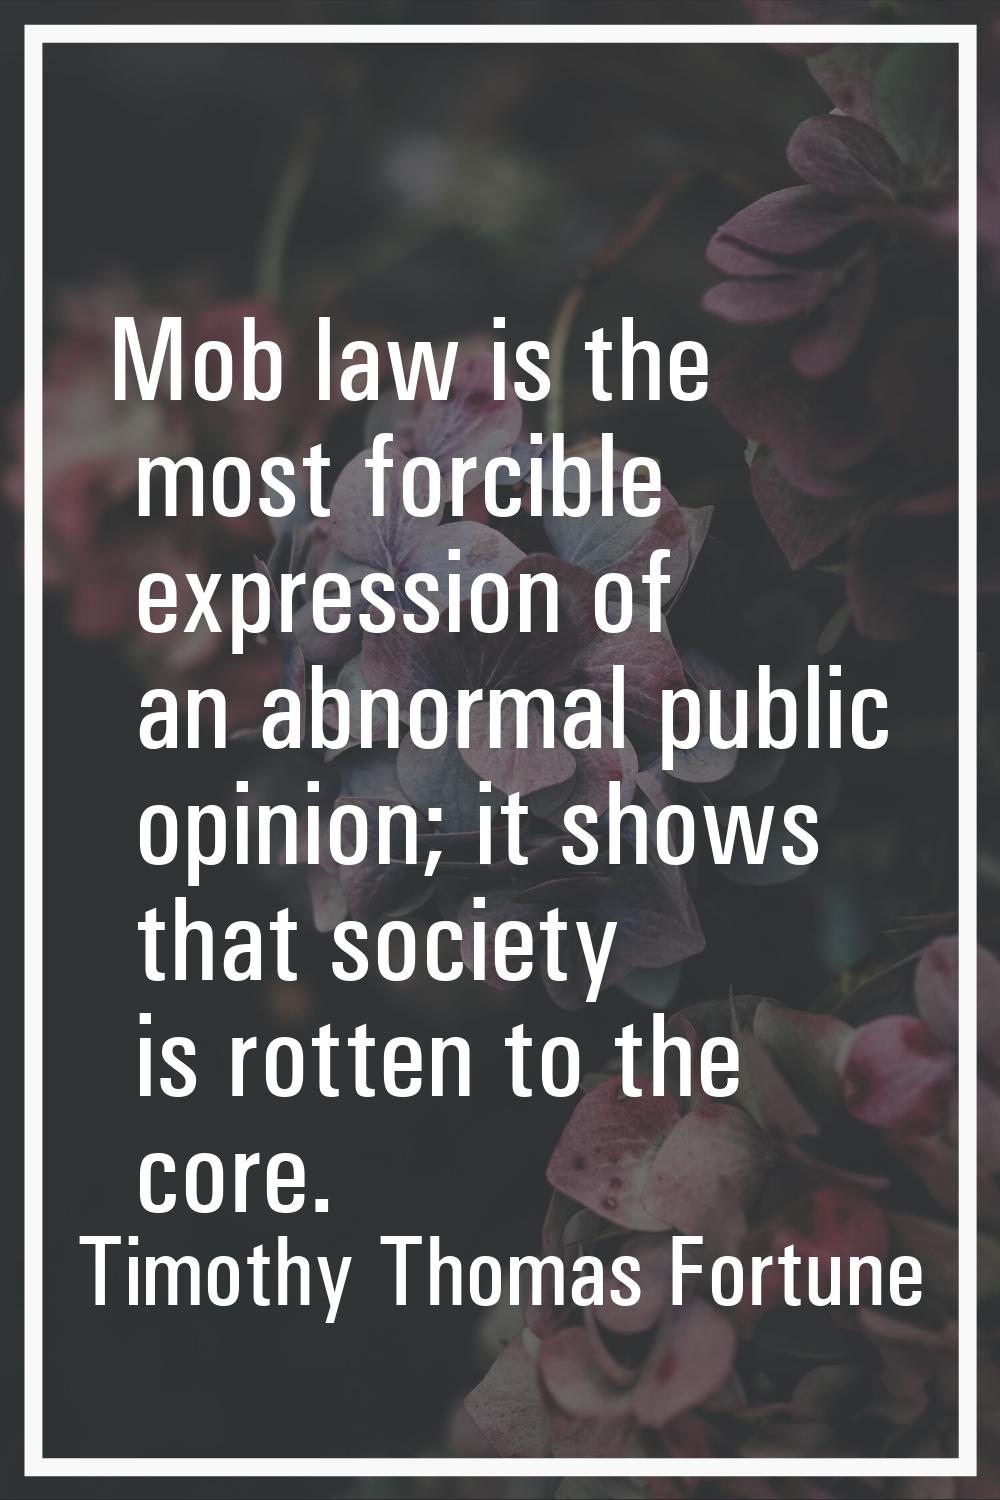 Mob law is the most forcible expression of an abnormal public opinion; it shows that society is rot